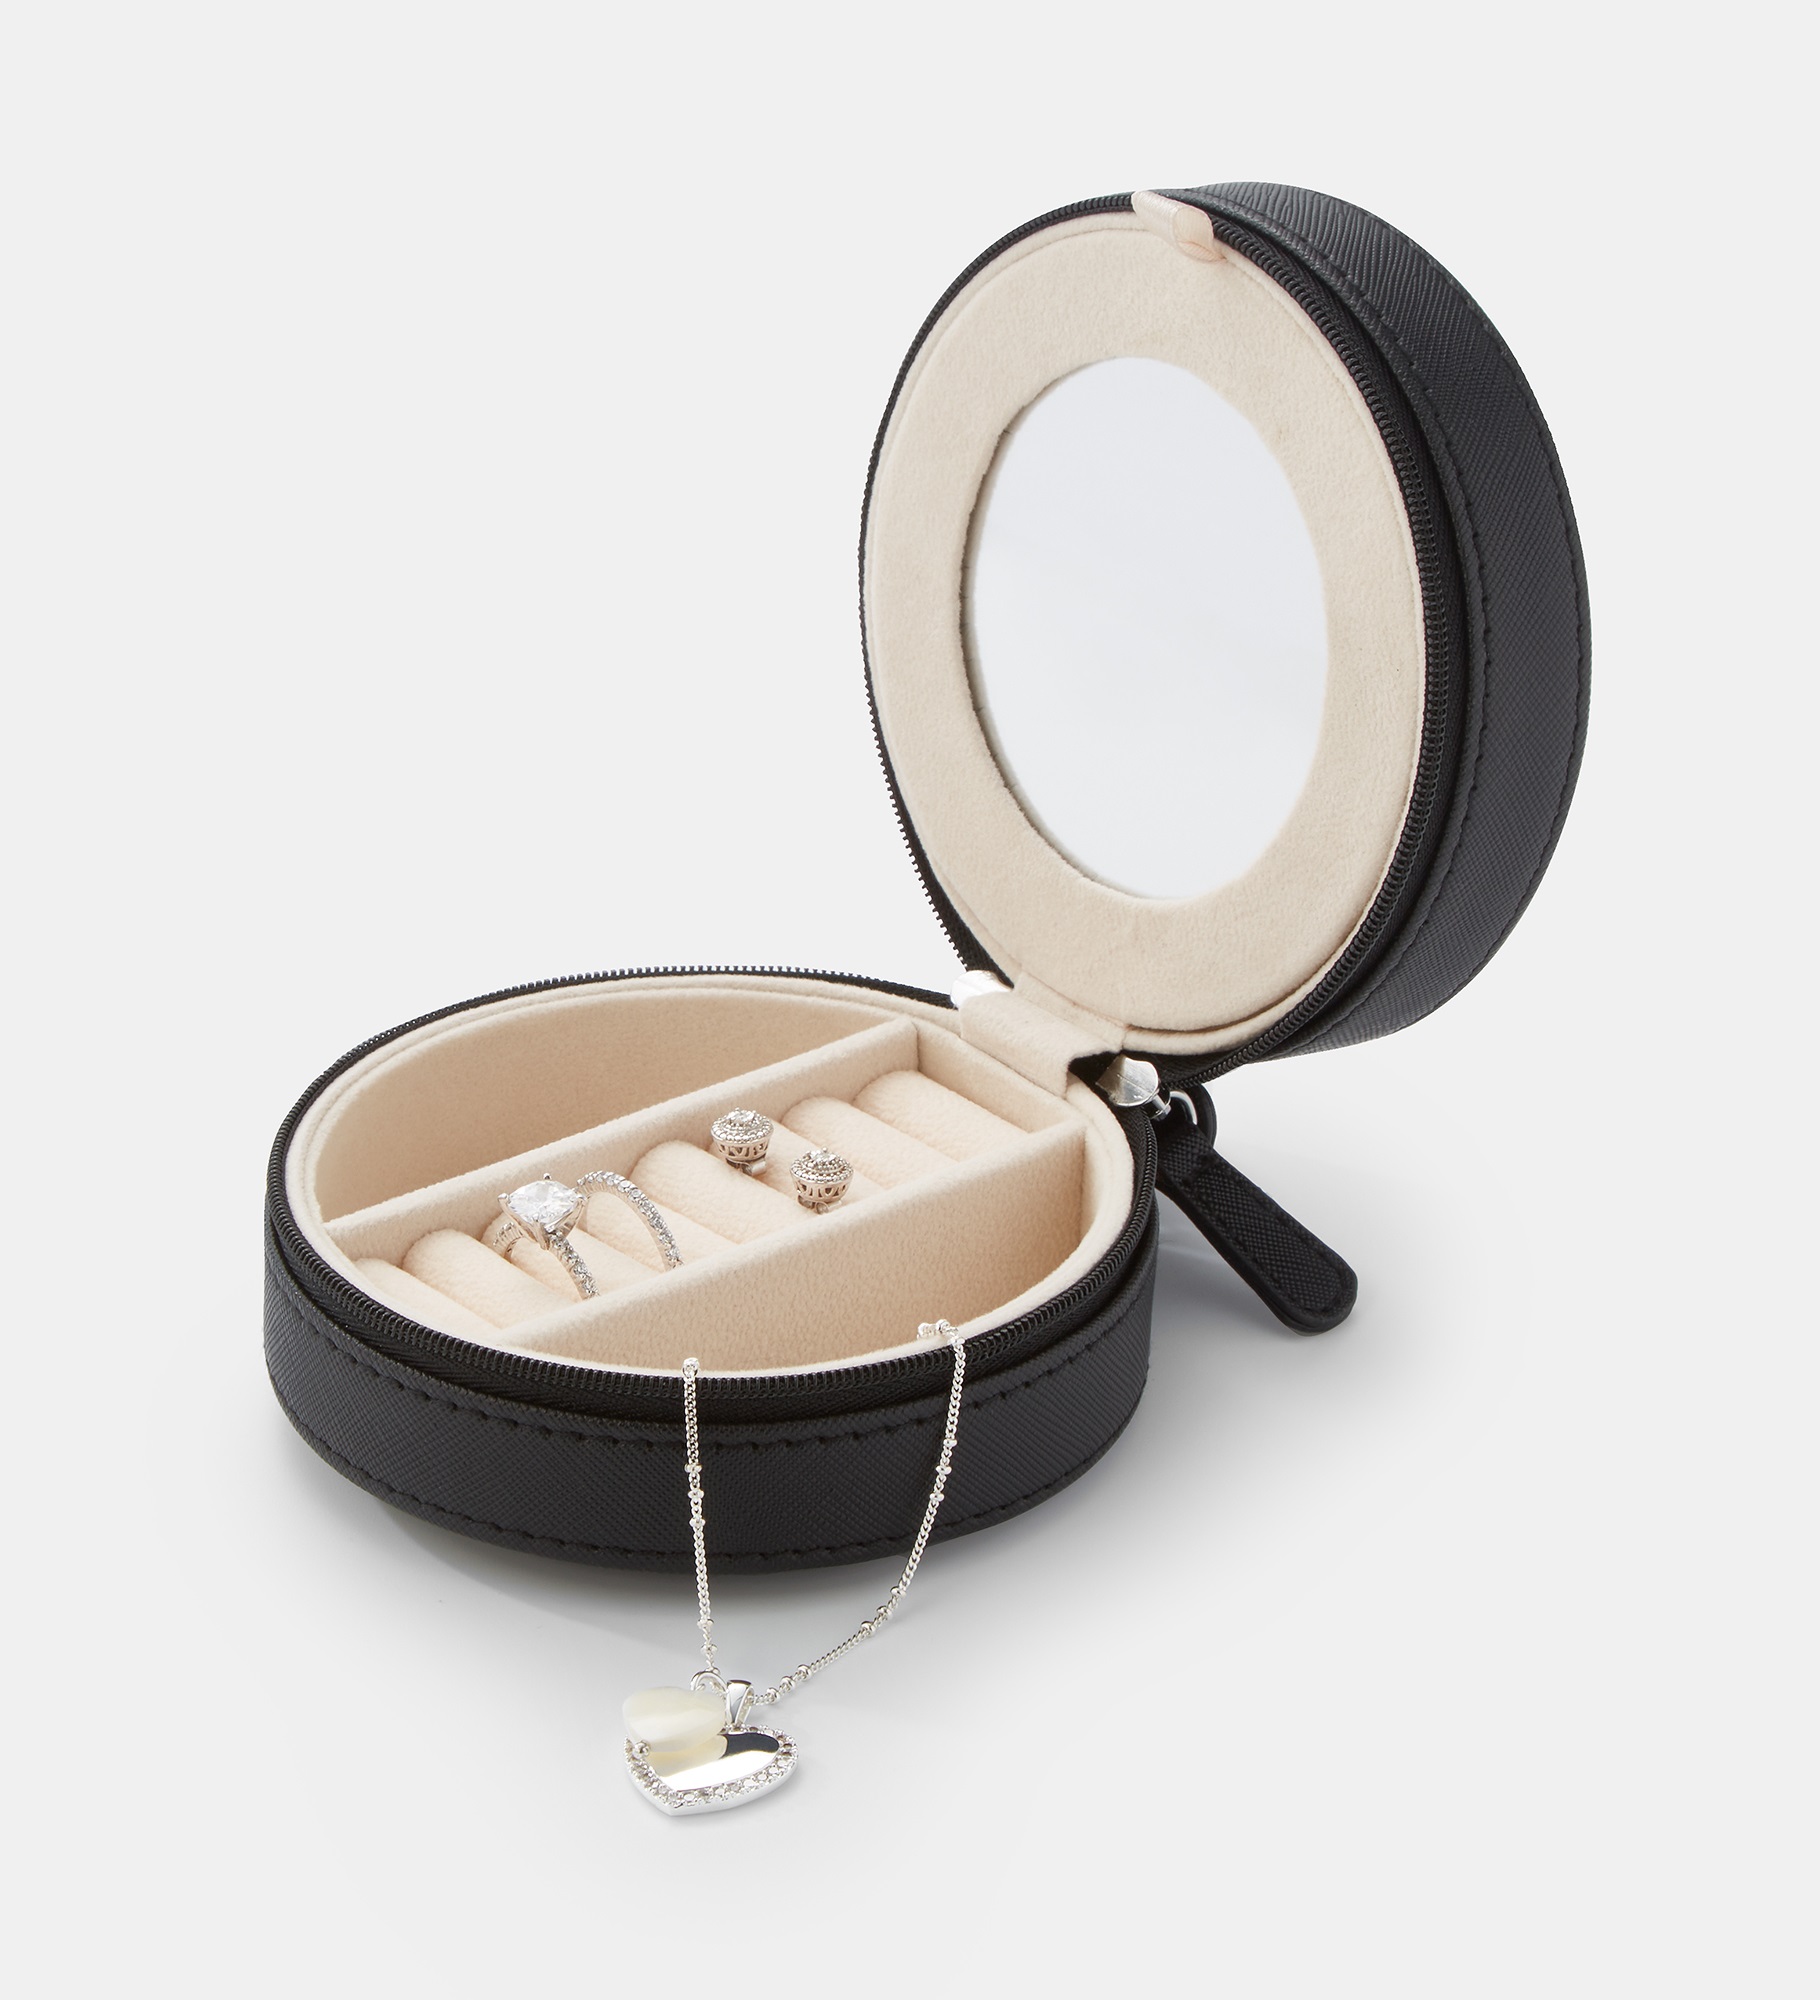  Engraved Round Jewelry Box and Travel Case in Black